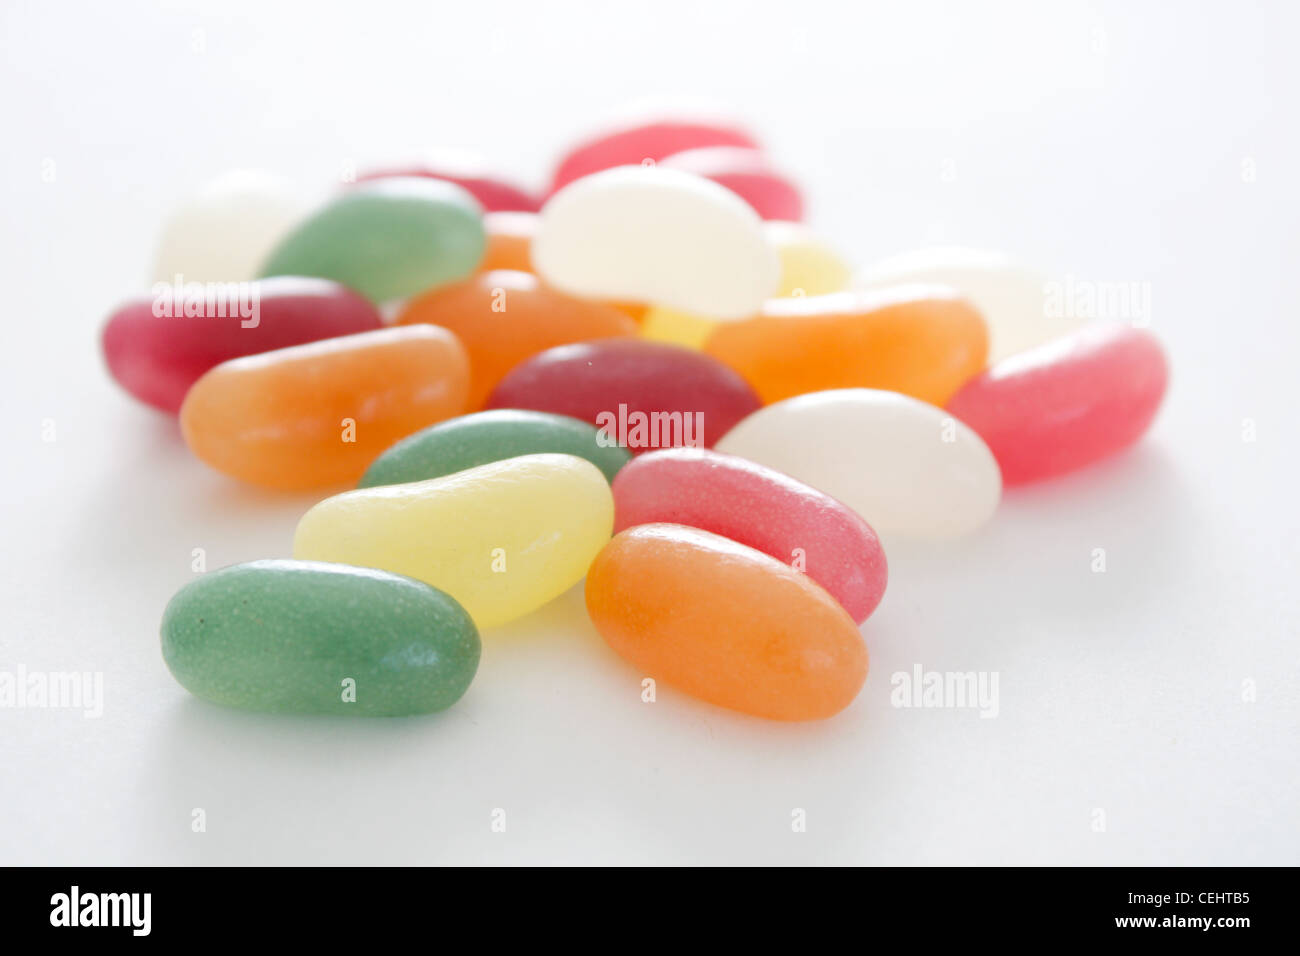 Chewy candy Stock Photo